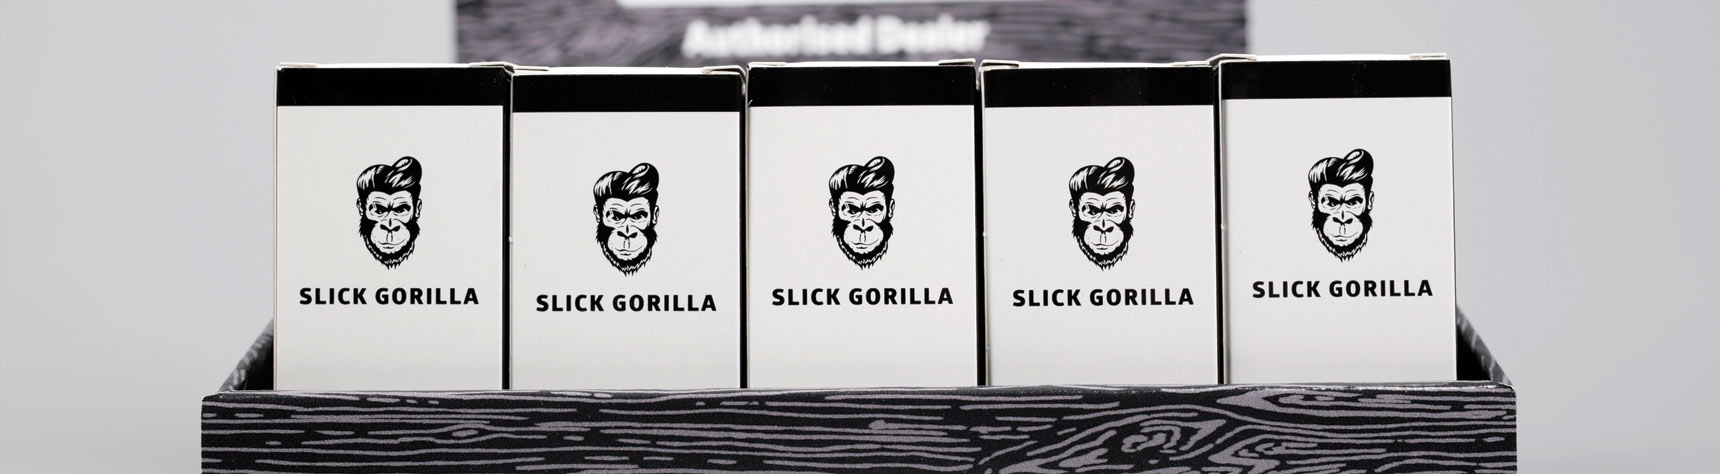 Slick Gorilla Hair Products for Men